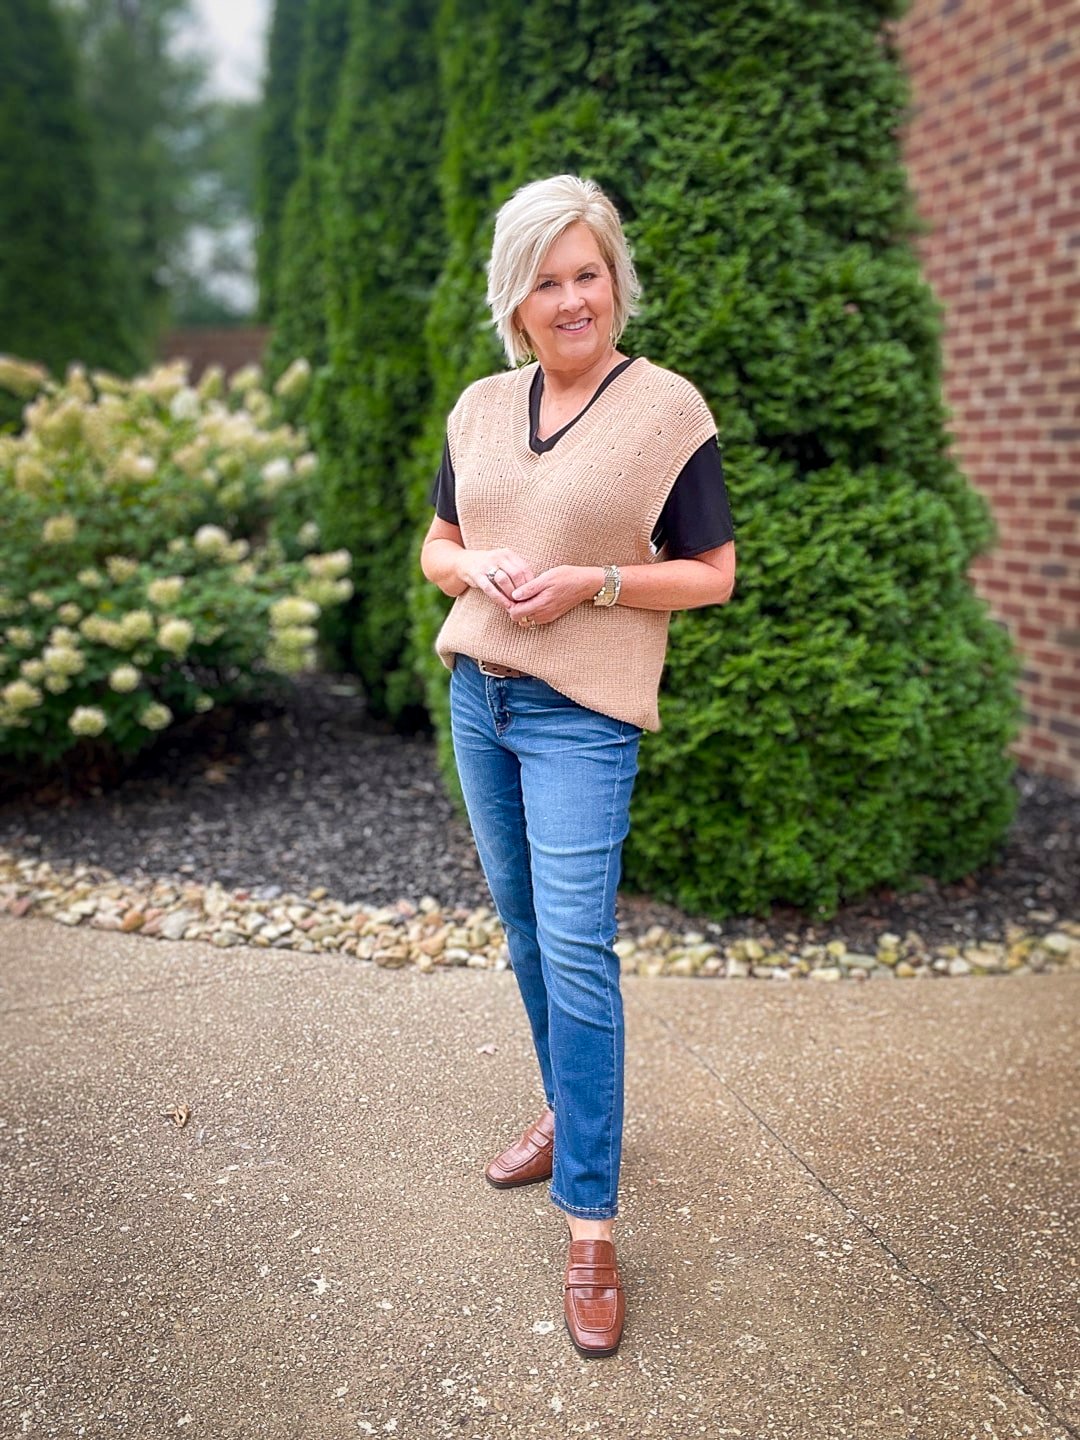 Over 40 Fashion Blogger, Tania Stephens is wearing a tan vest for fall from Walmart17